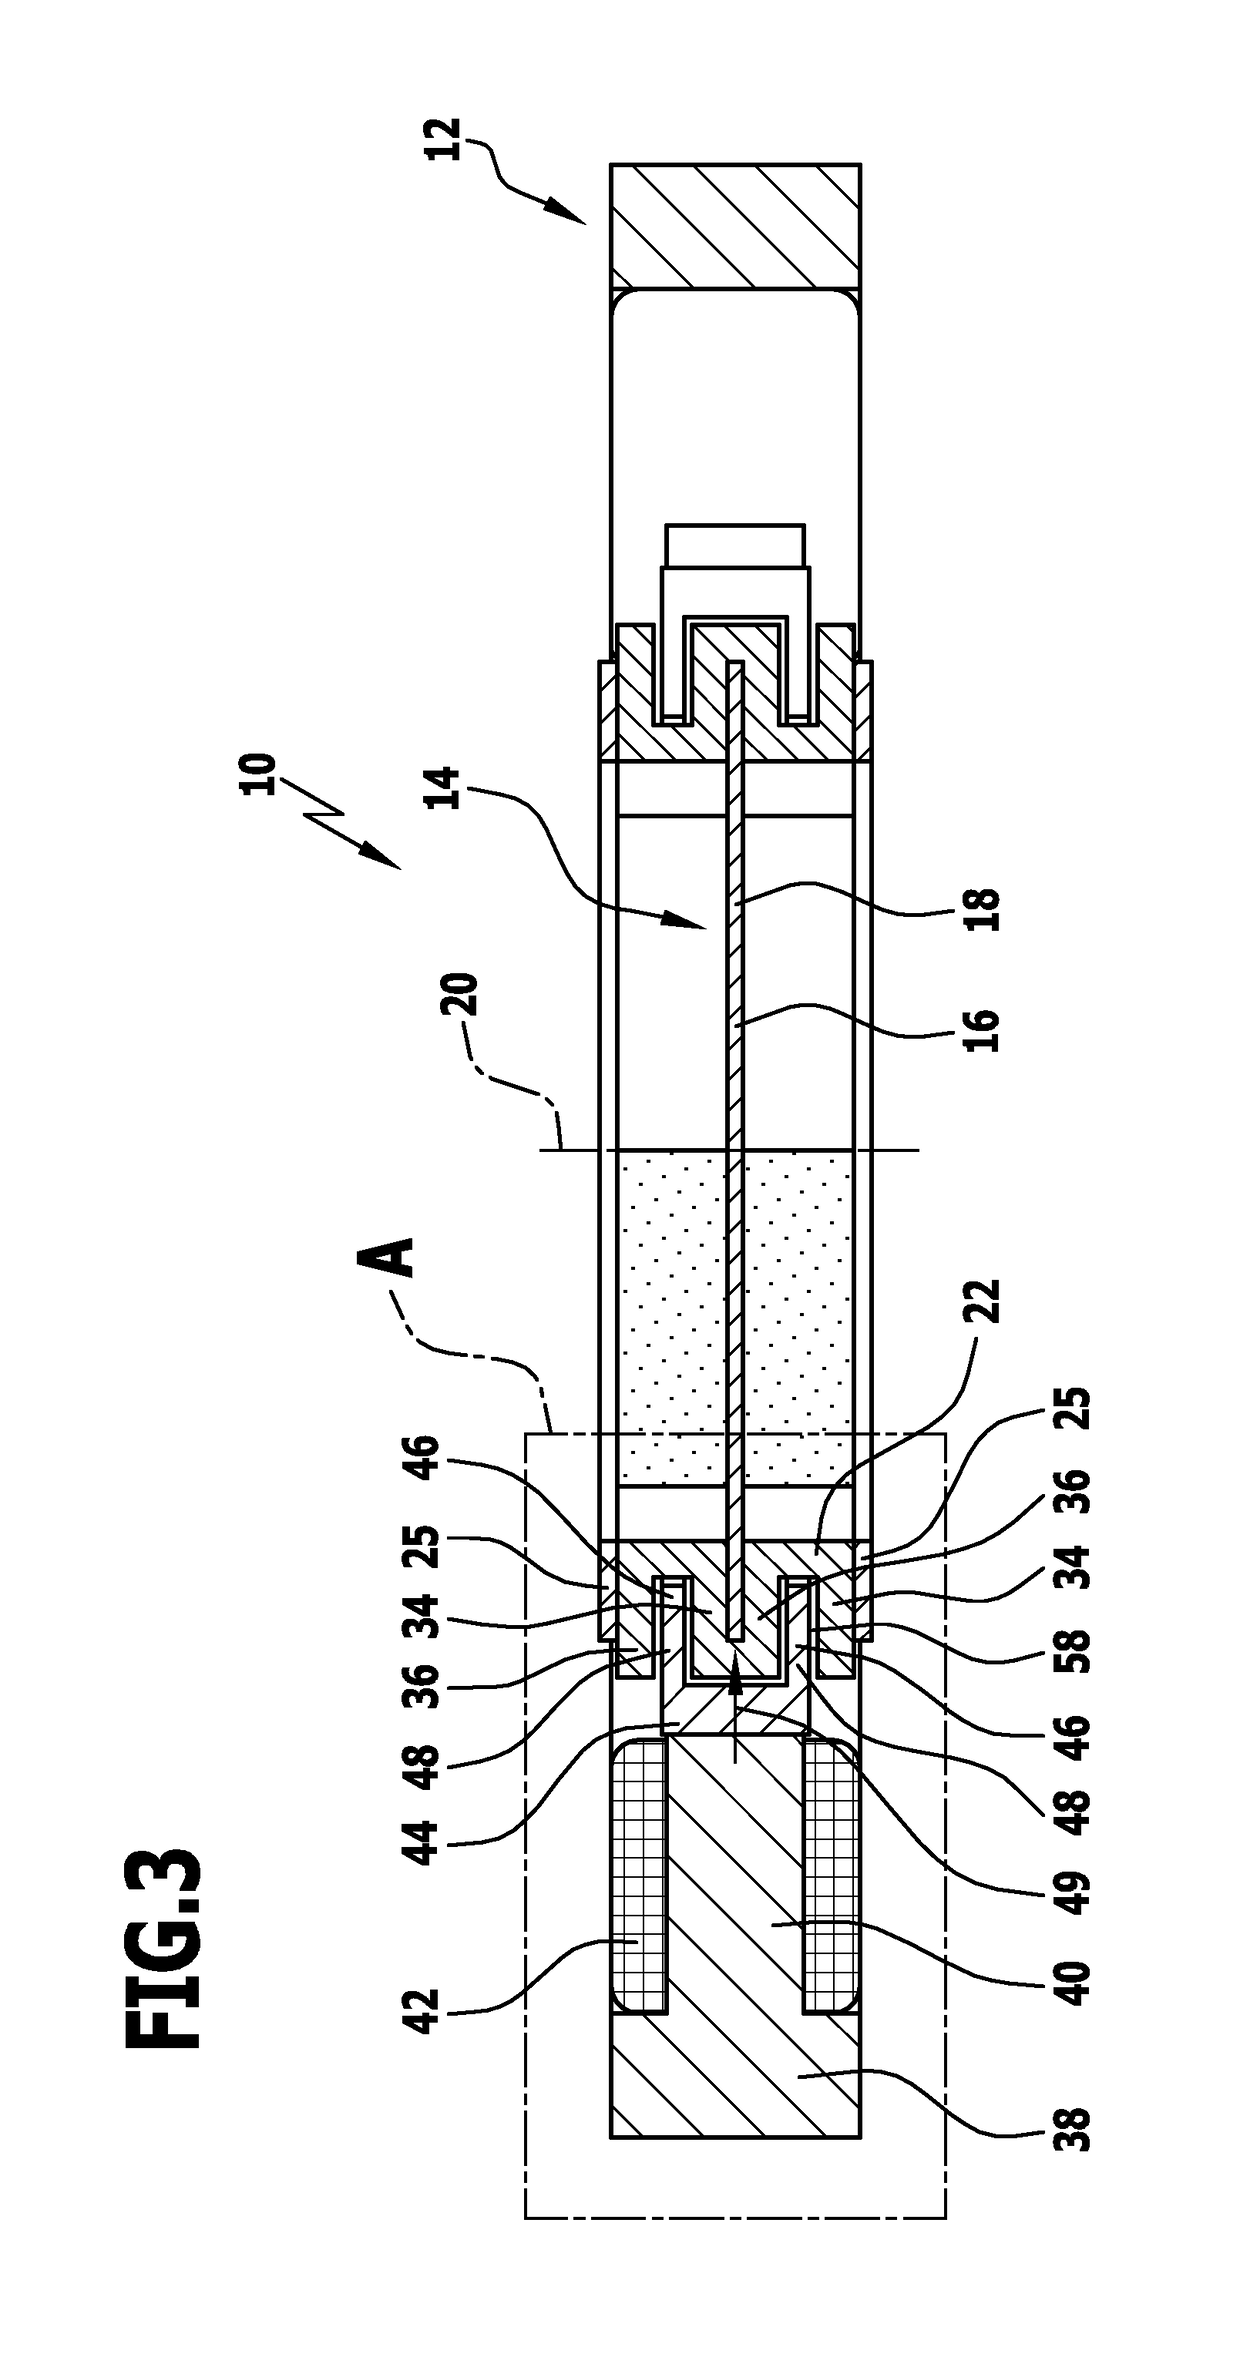 Stator-rotor device for an electrical machine